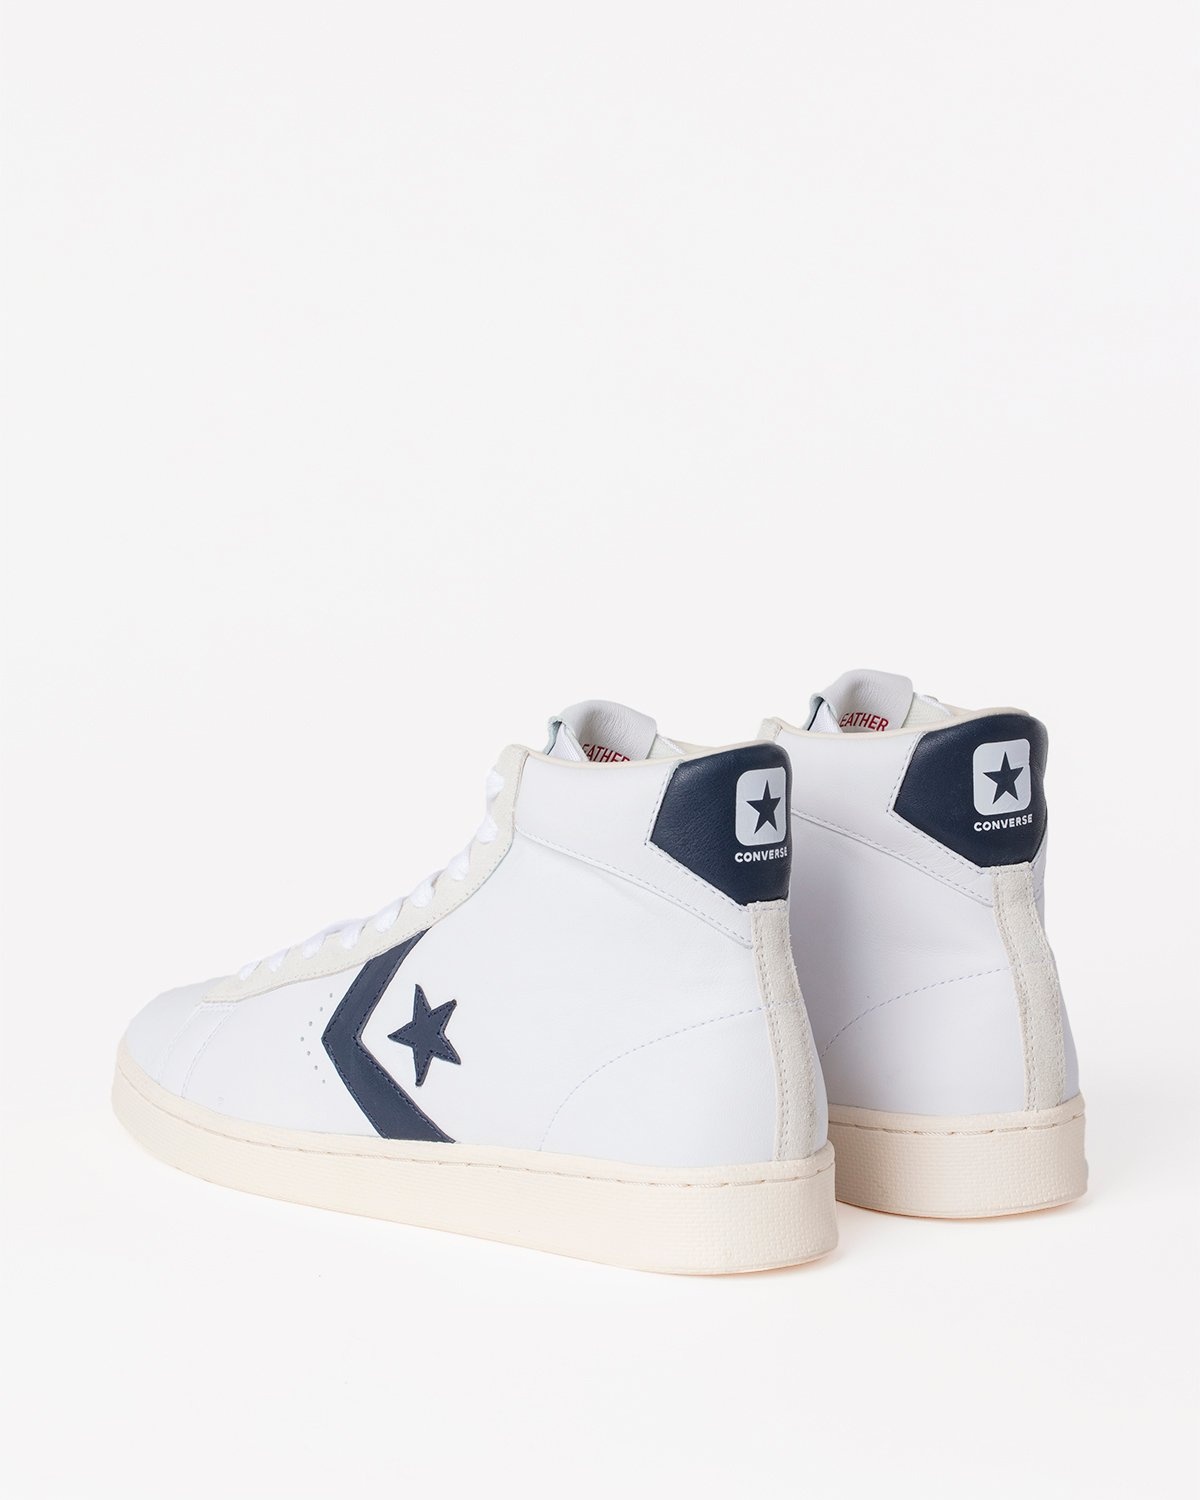 Converse – Pro Leather OG Mid White/Obsidian/Egret - High Top Sneakers - White - Image 4